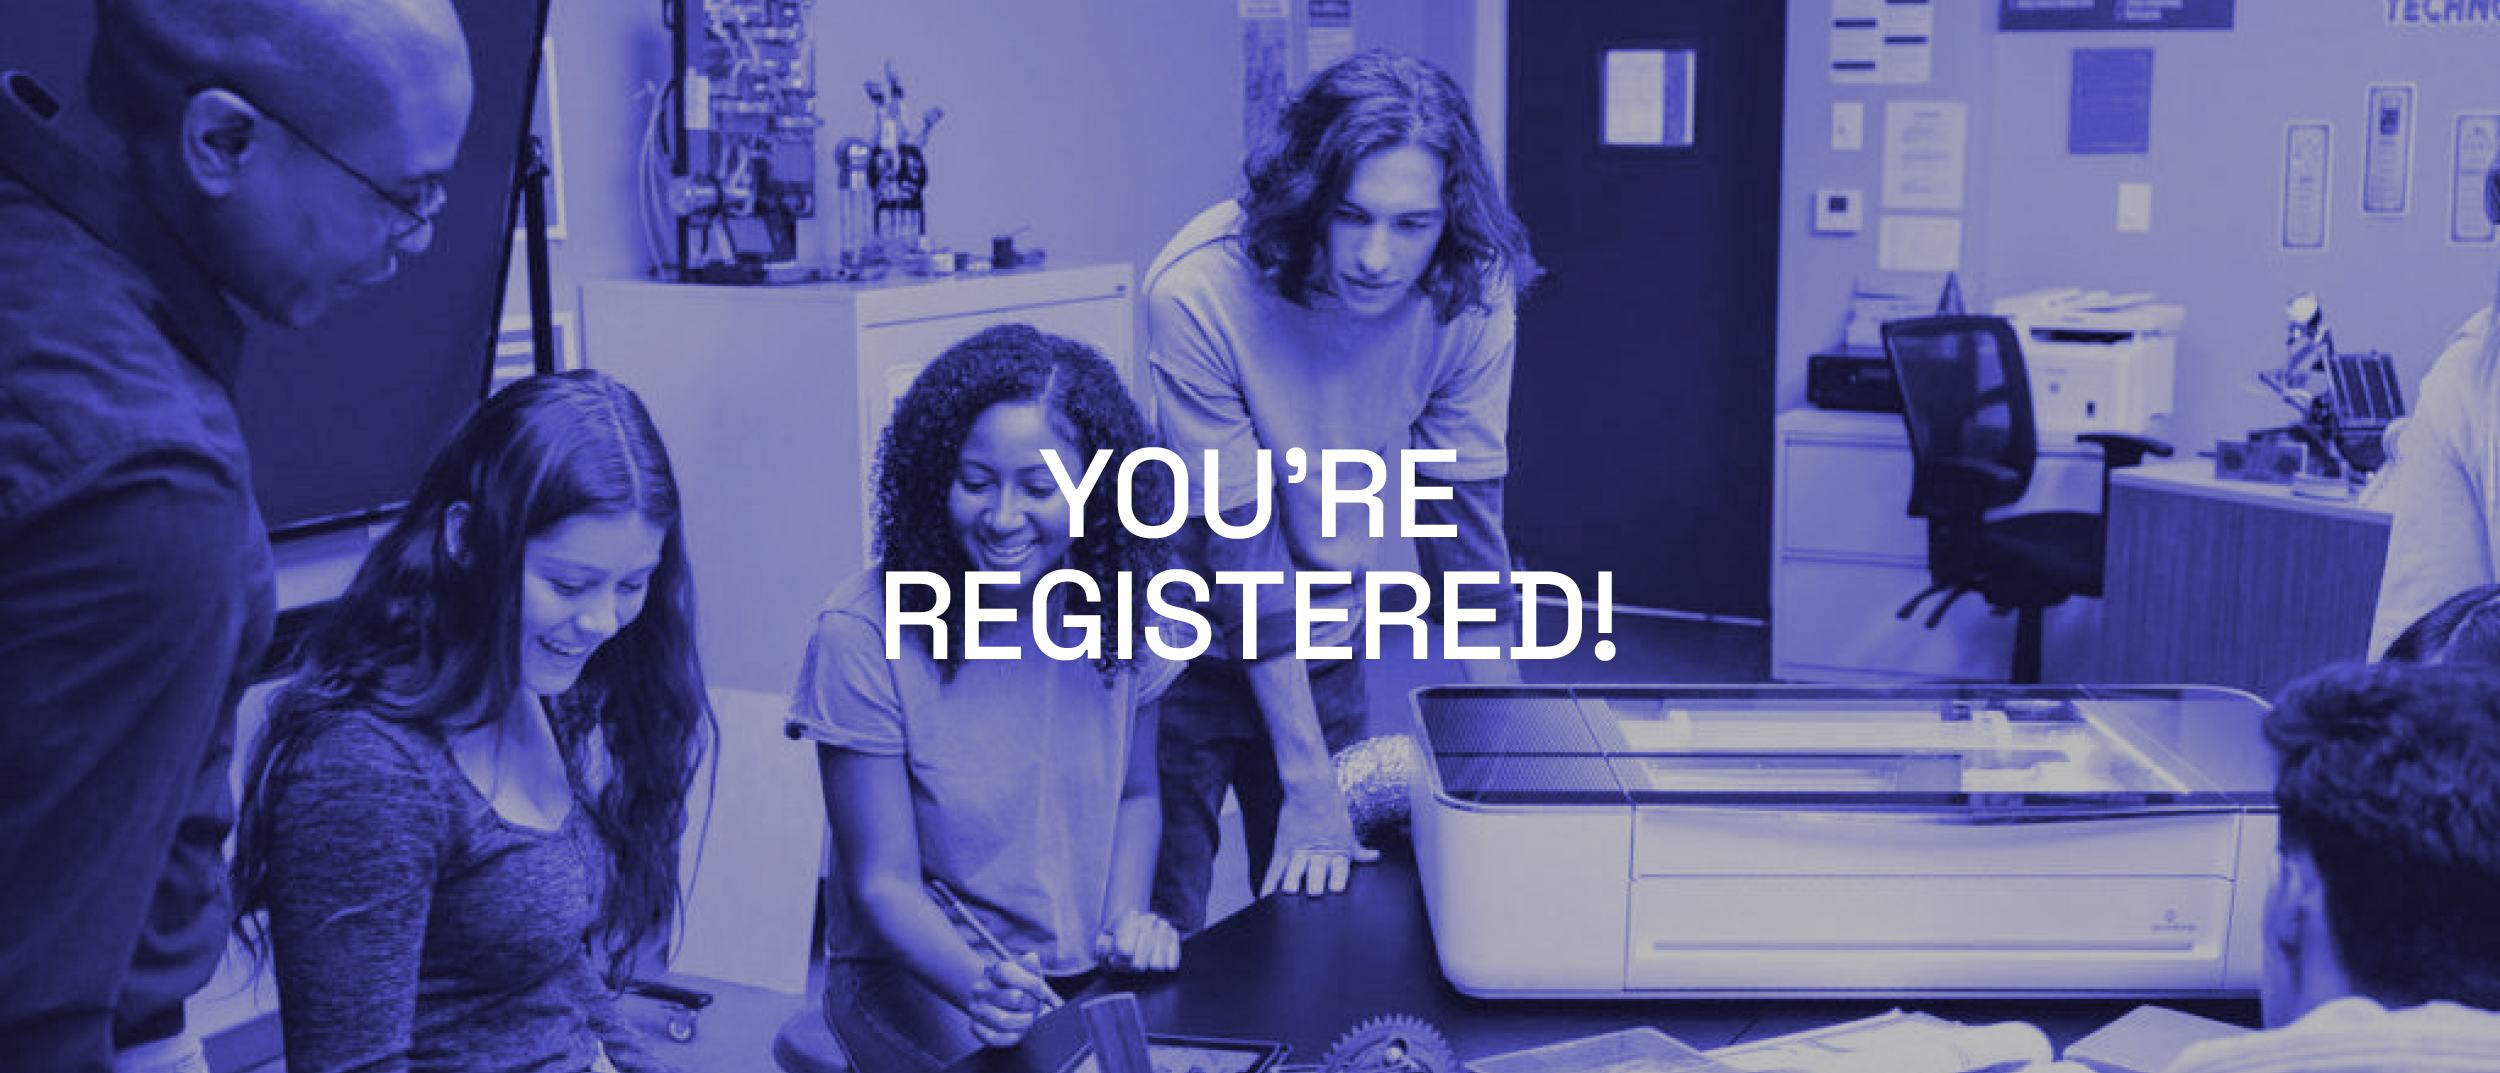 You're registered.